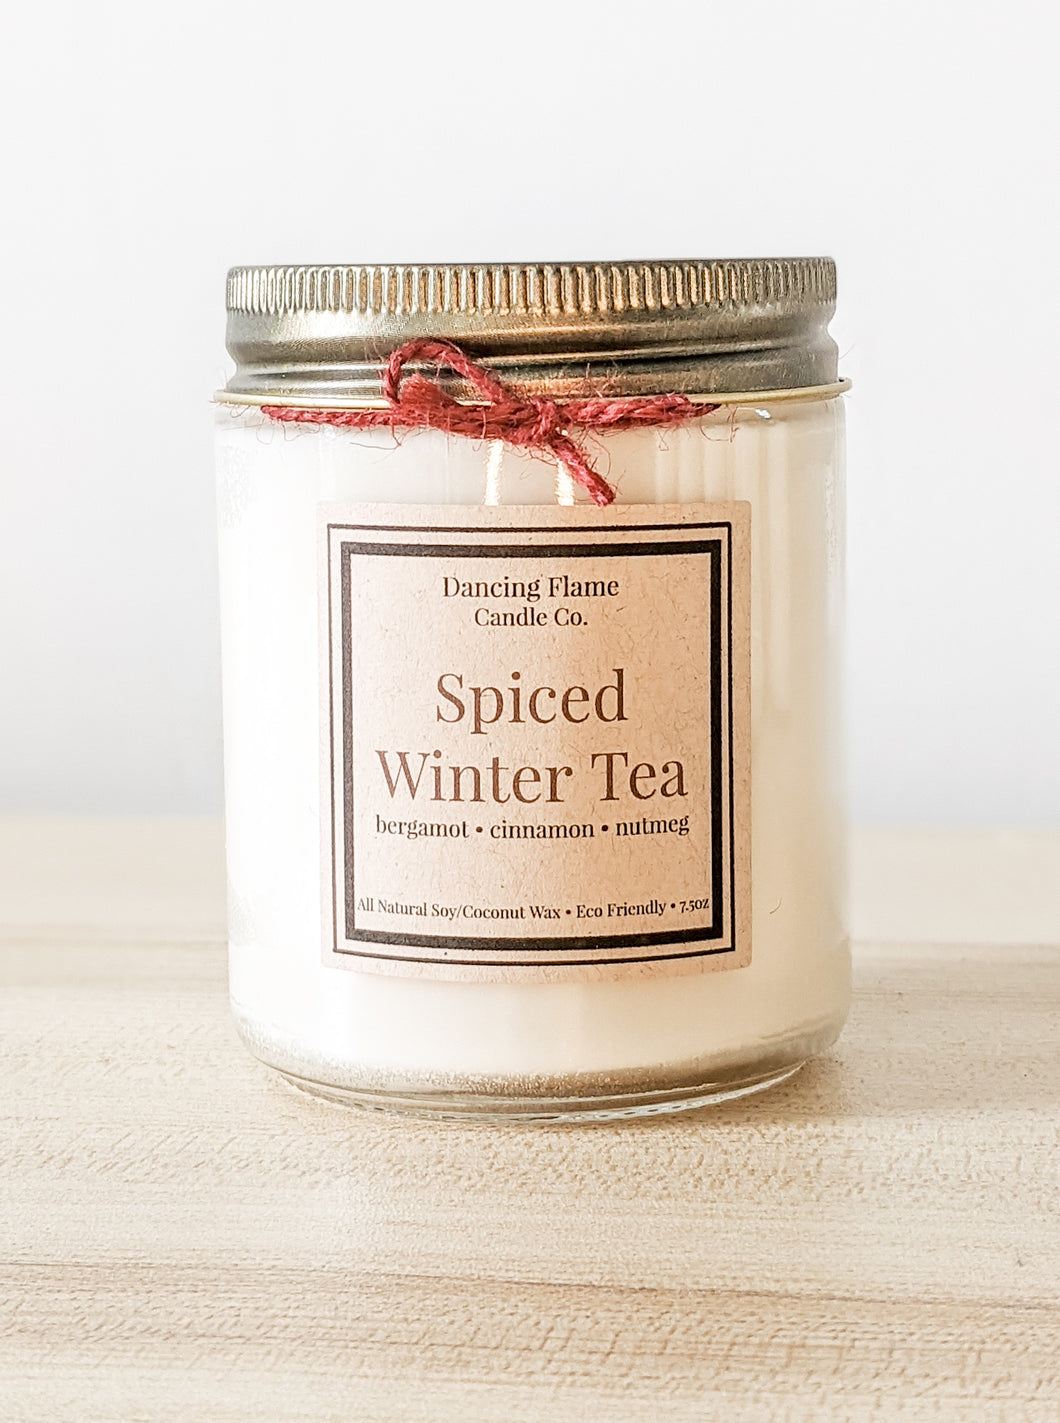 Spiced Winter Tea Soy & Coconut Wax Candle